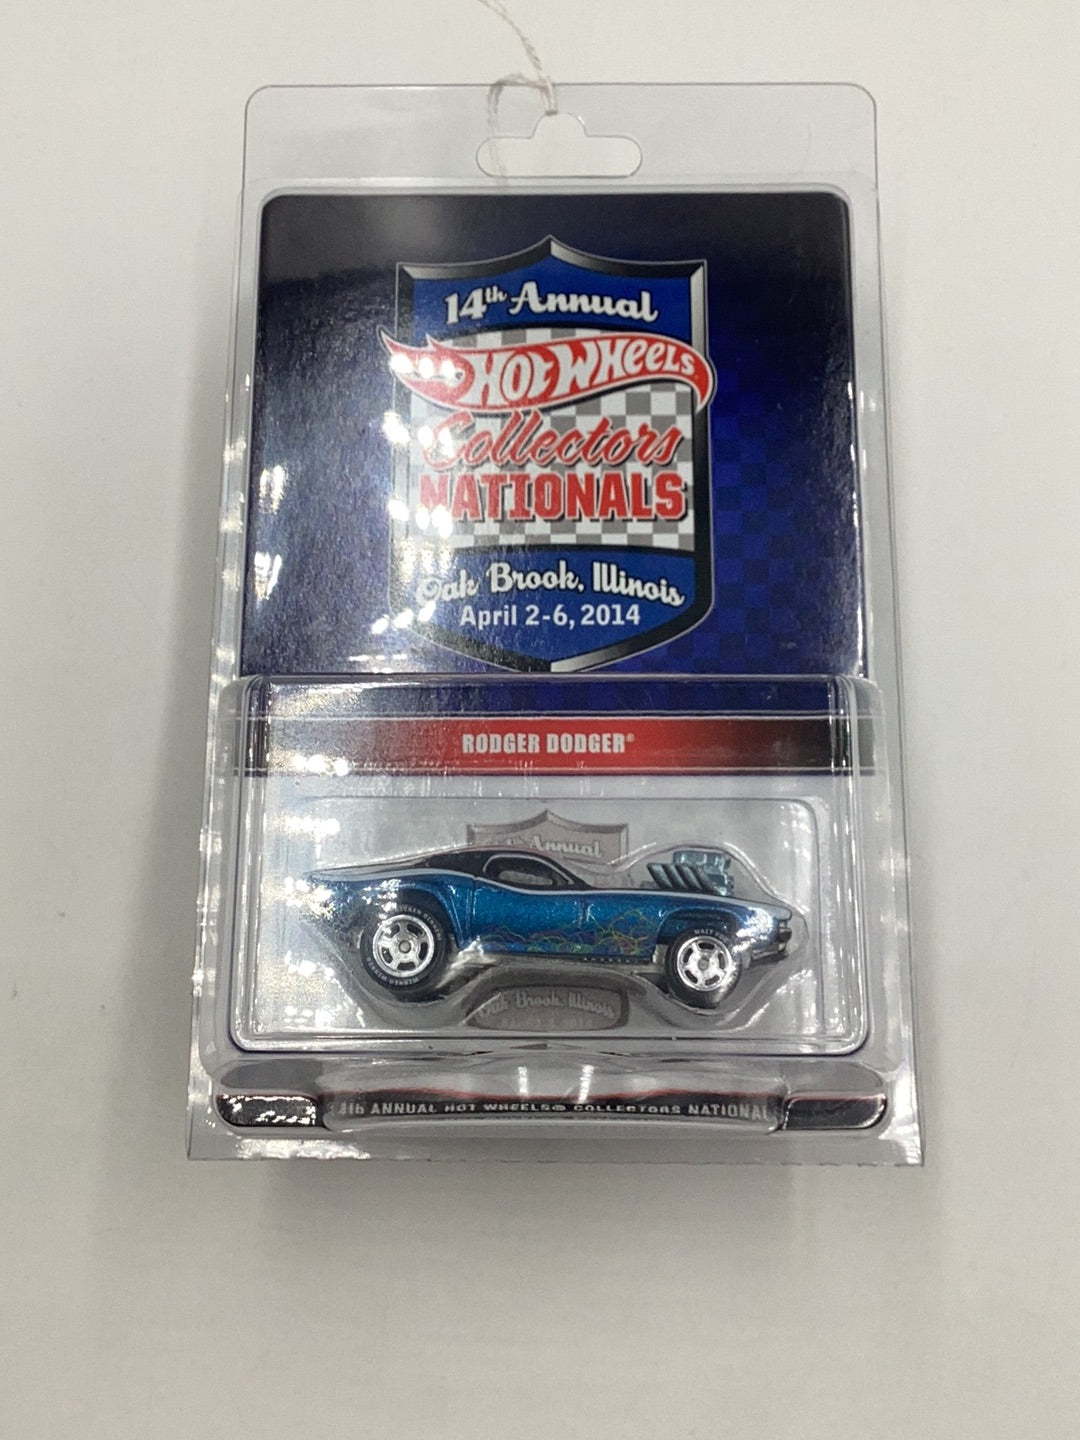 Hot Wheels 14th annual collectors nationals Rodger Dodger 1029/2000 with protector